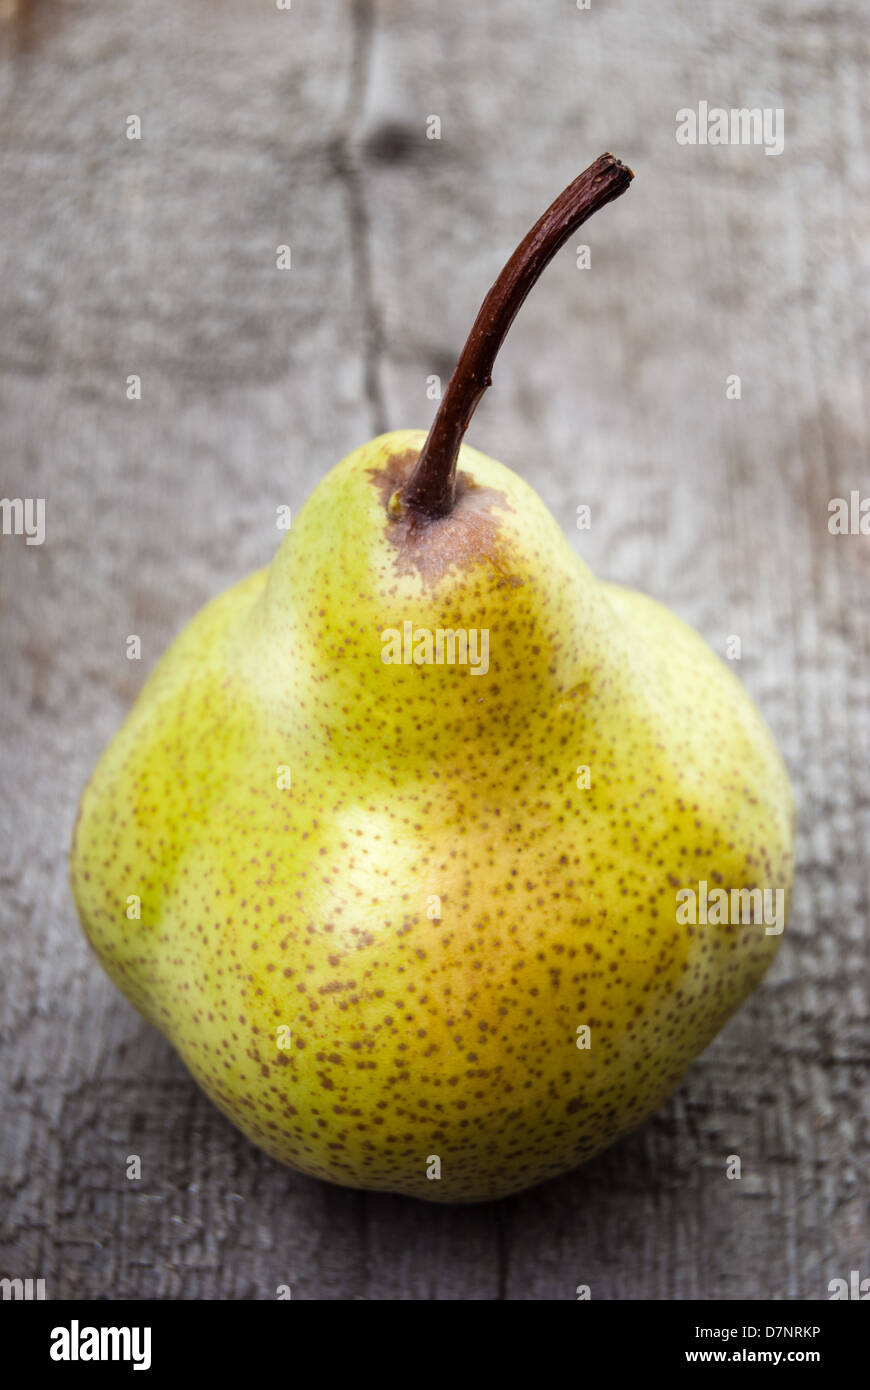 Yellow duchesse pear on wooden surface Stock Photo